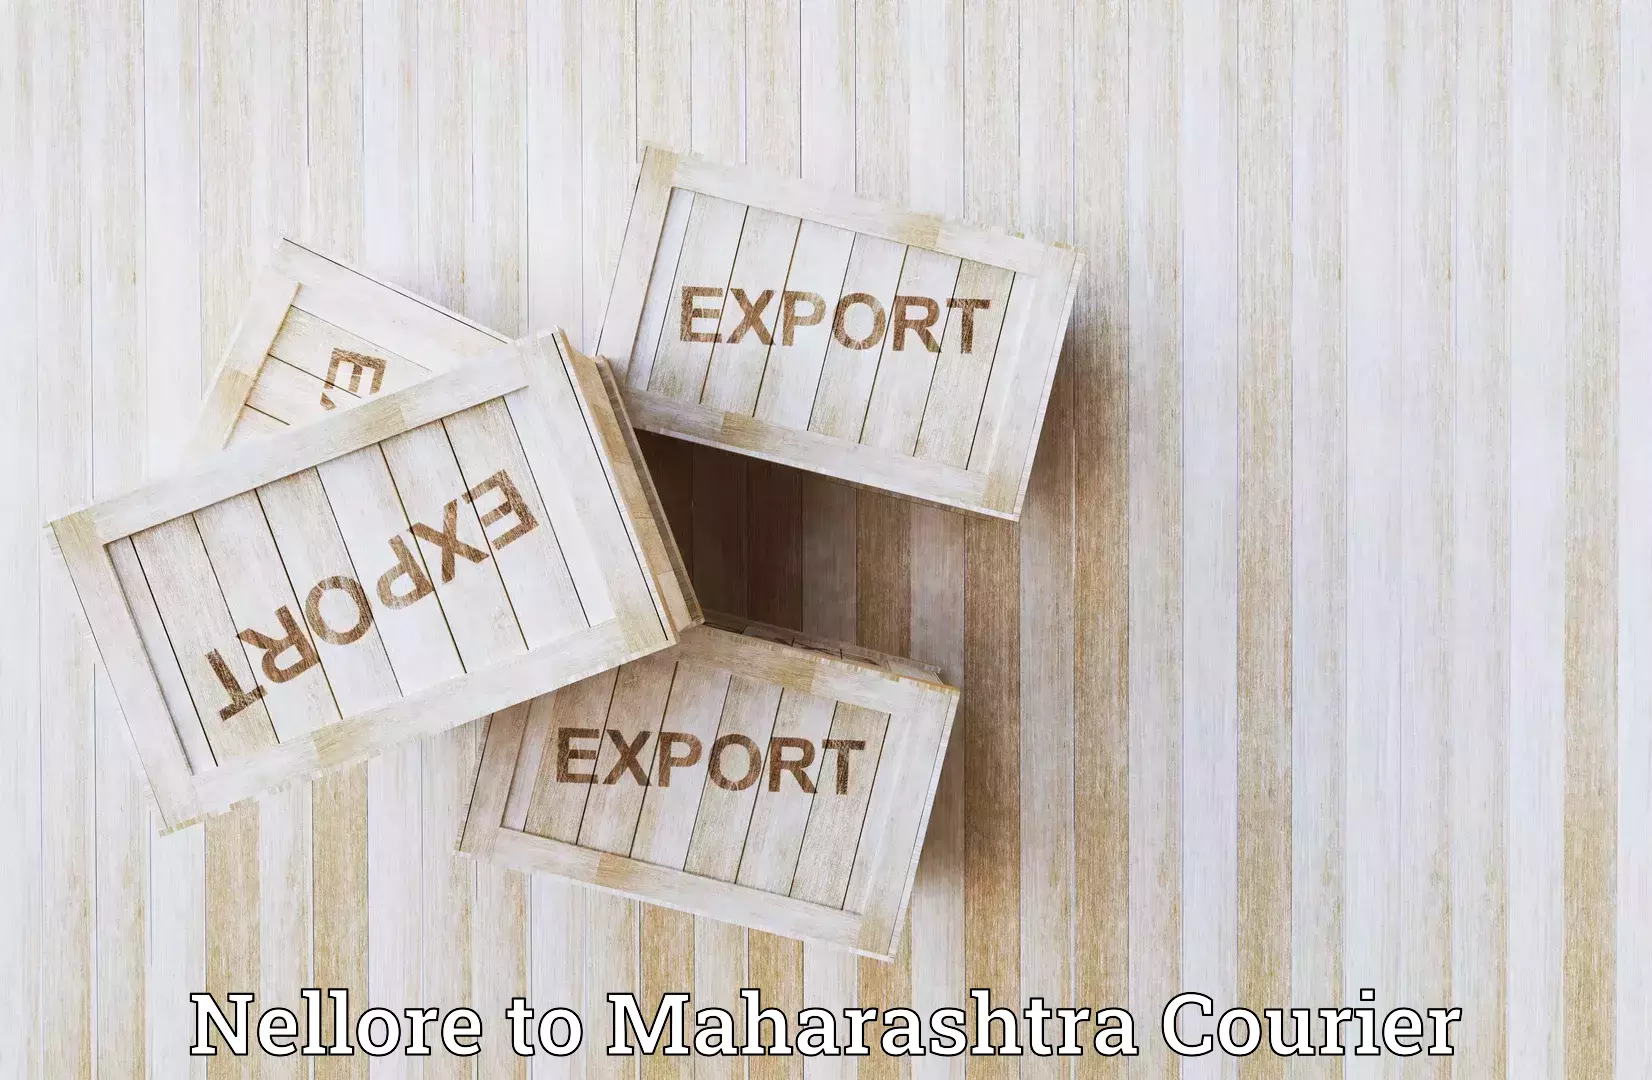 Courier service efficiency Nellore to Jalna